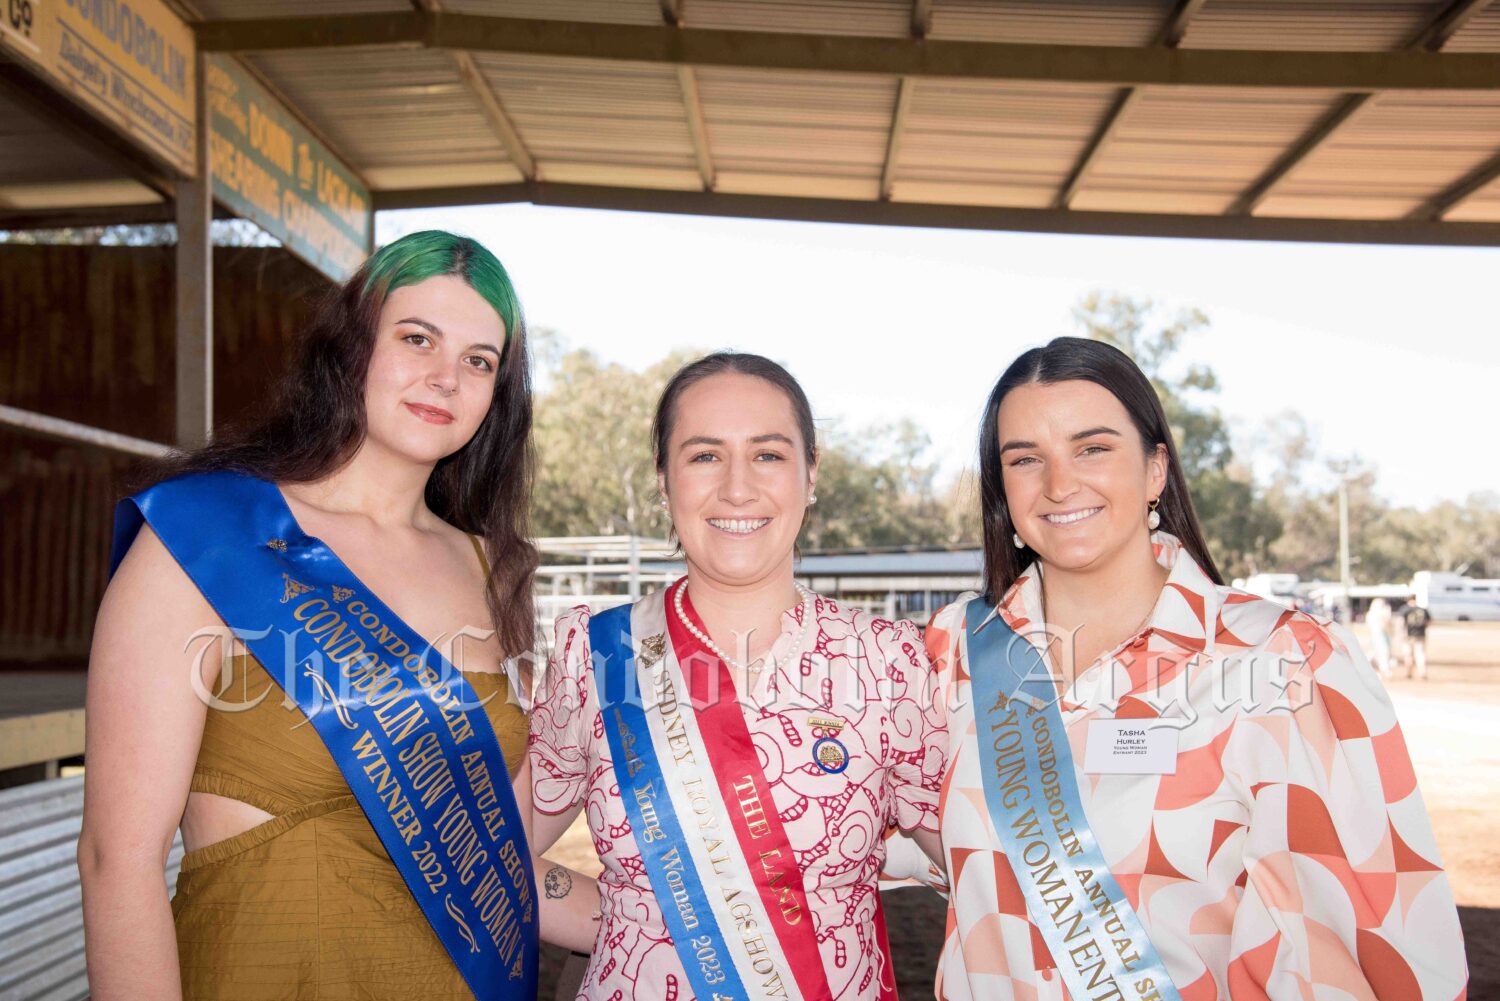 Alessandra Chamen (Condobolin’s 2022 The Land Sydney Royal AgShows NSW Young Woman Winner), Florance McGuffecke (2023 The Land Sydney Royal Agshows Young Woman winner) and Tasha Hurley (Condobolin Show’s 2023 Young Woman Winner). Image Credit: Kathy Parnaby.